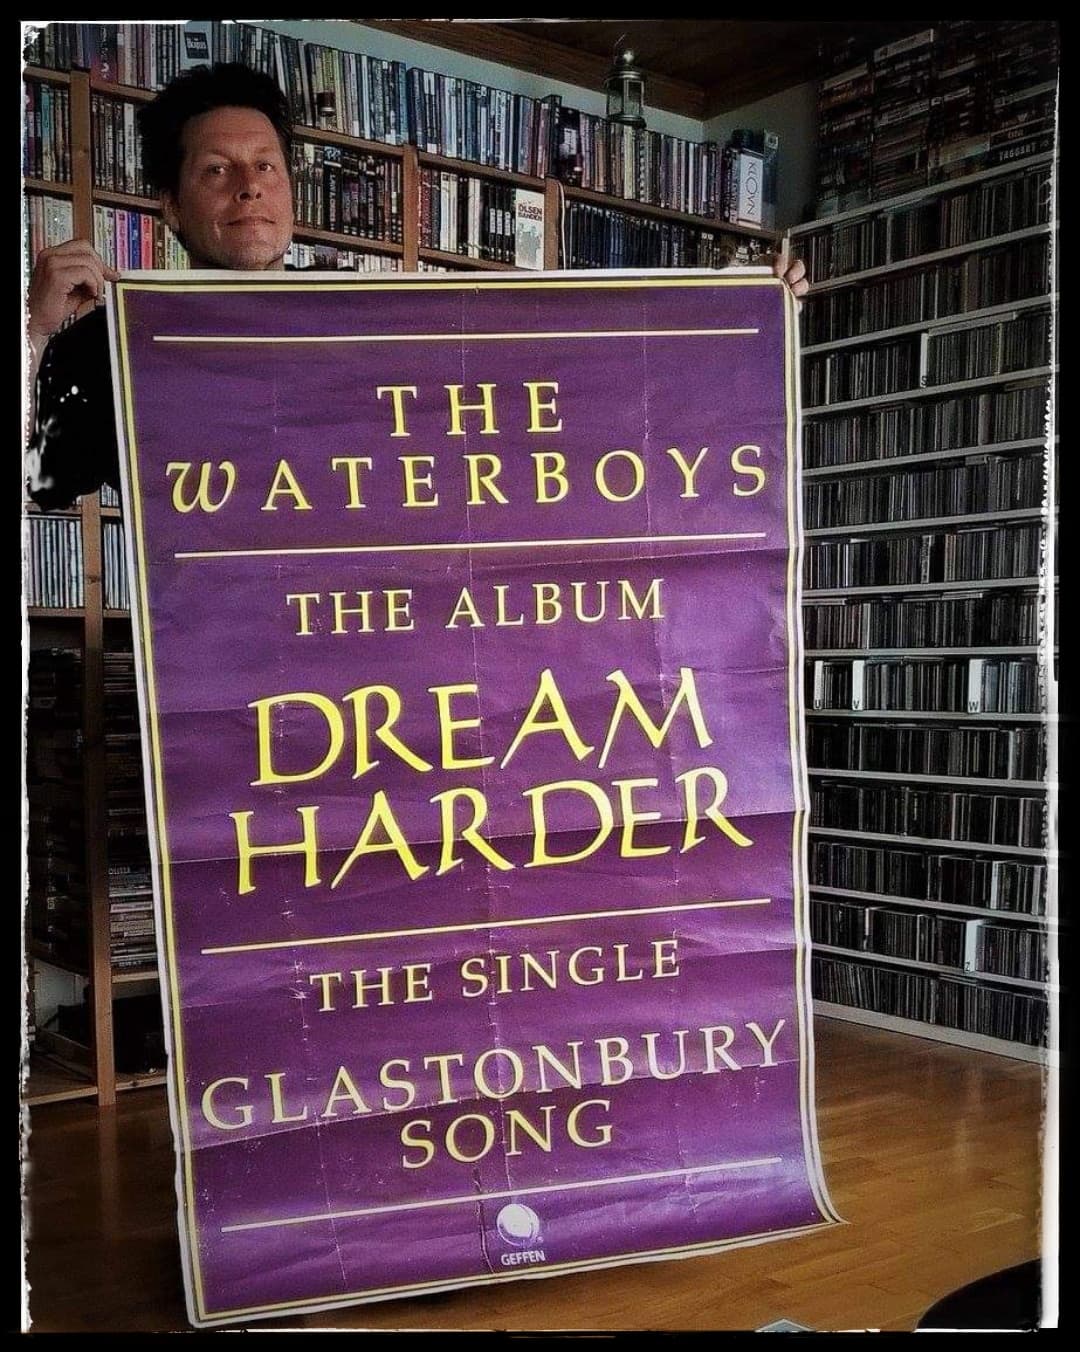 dag_and_glasto_song_poster